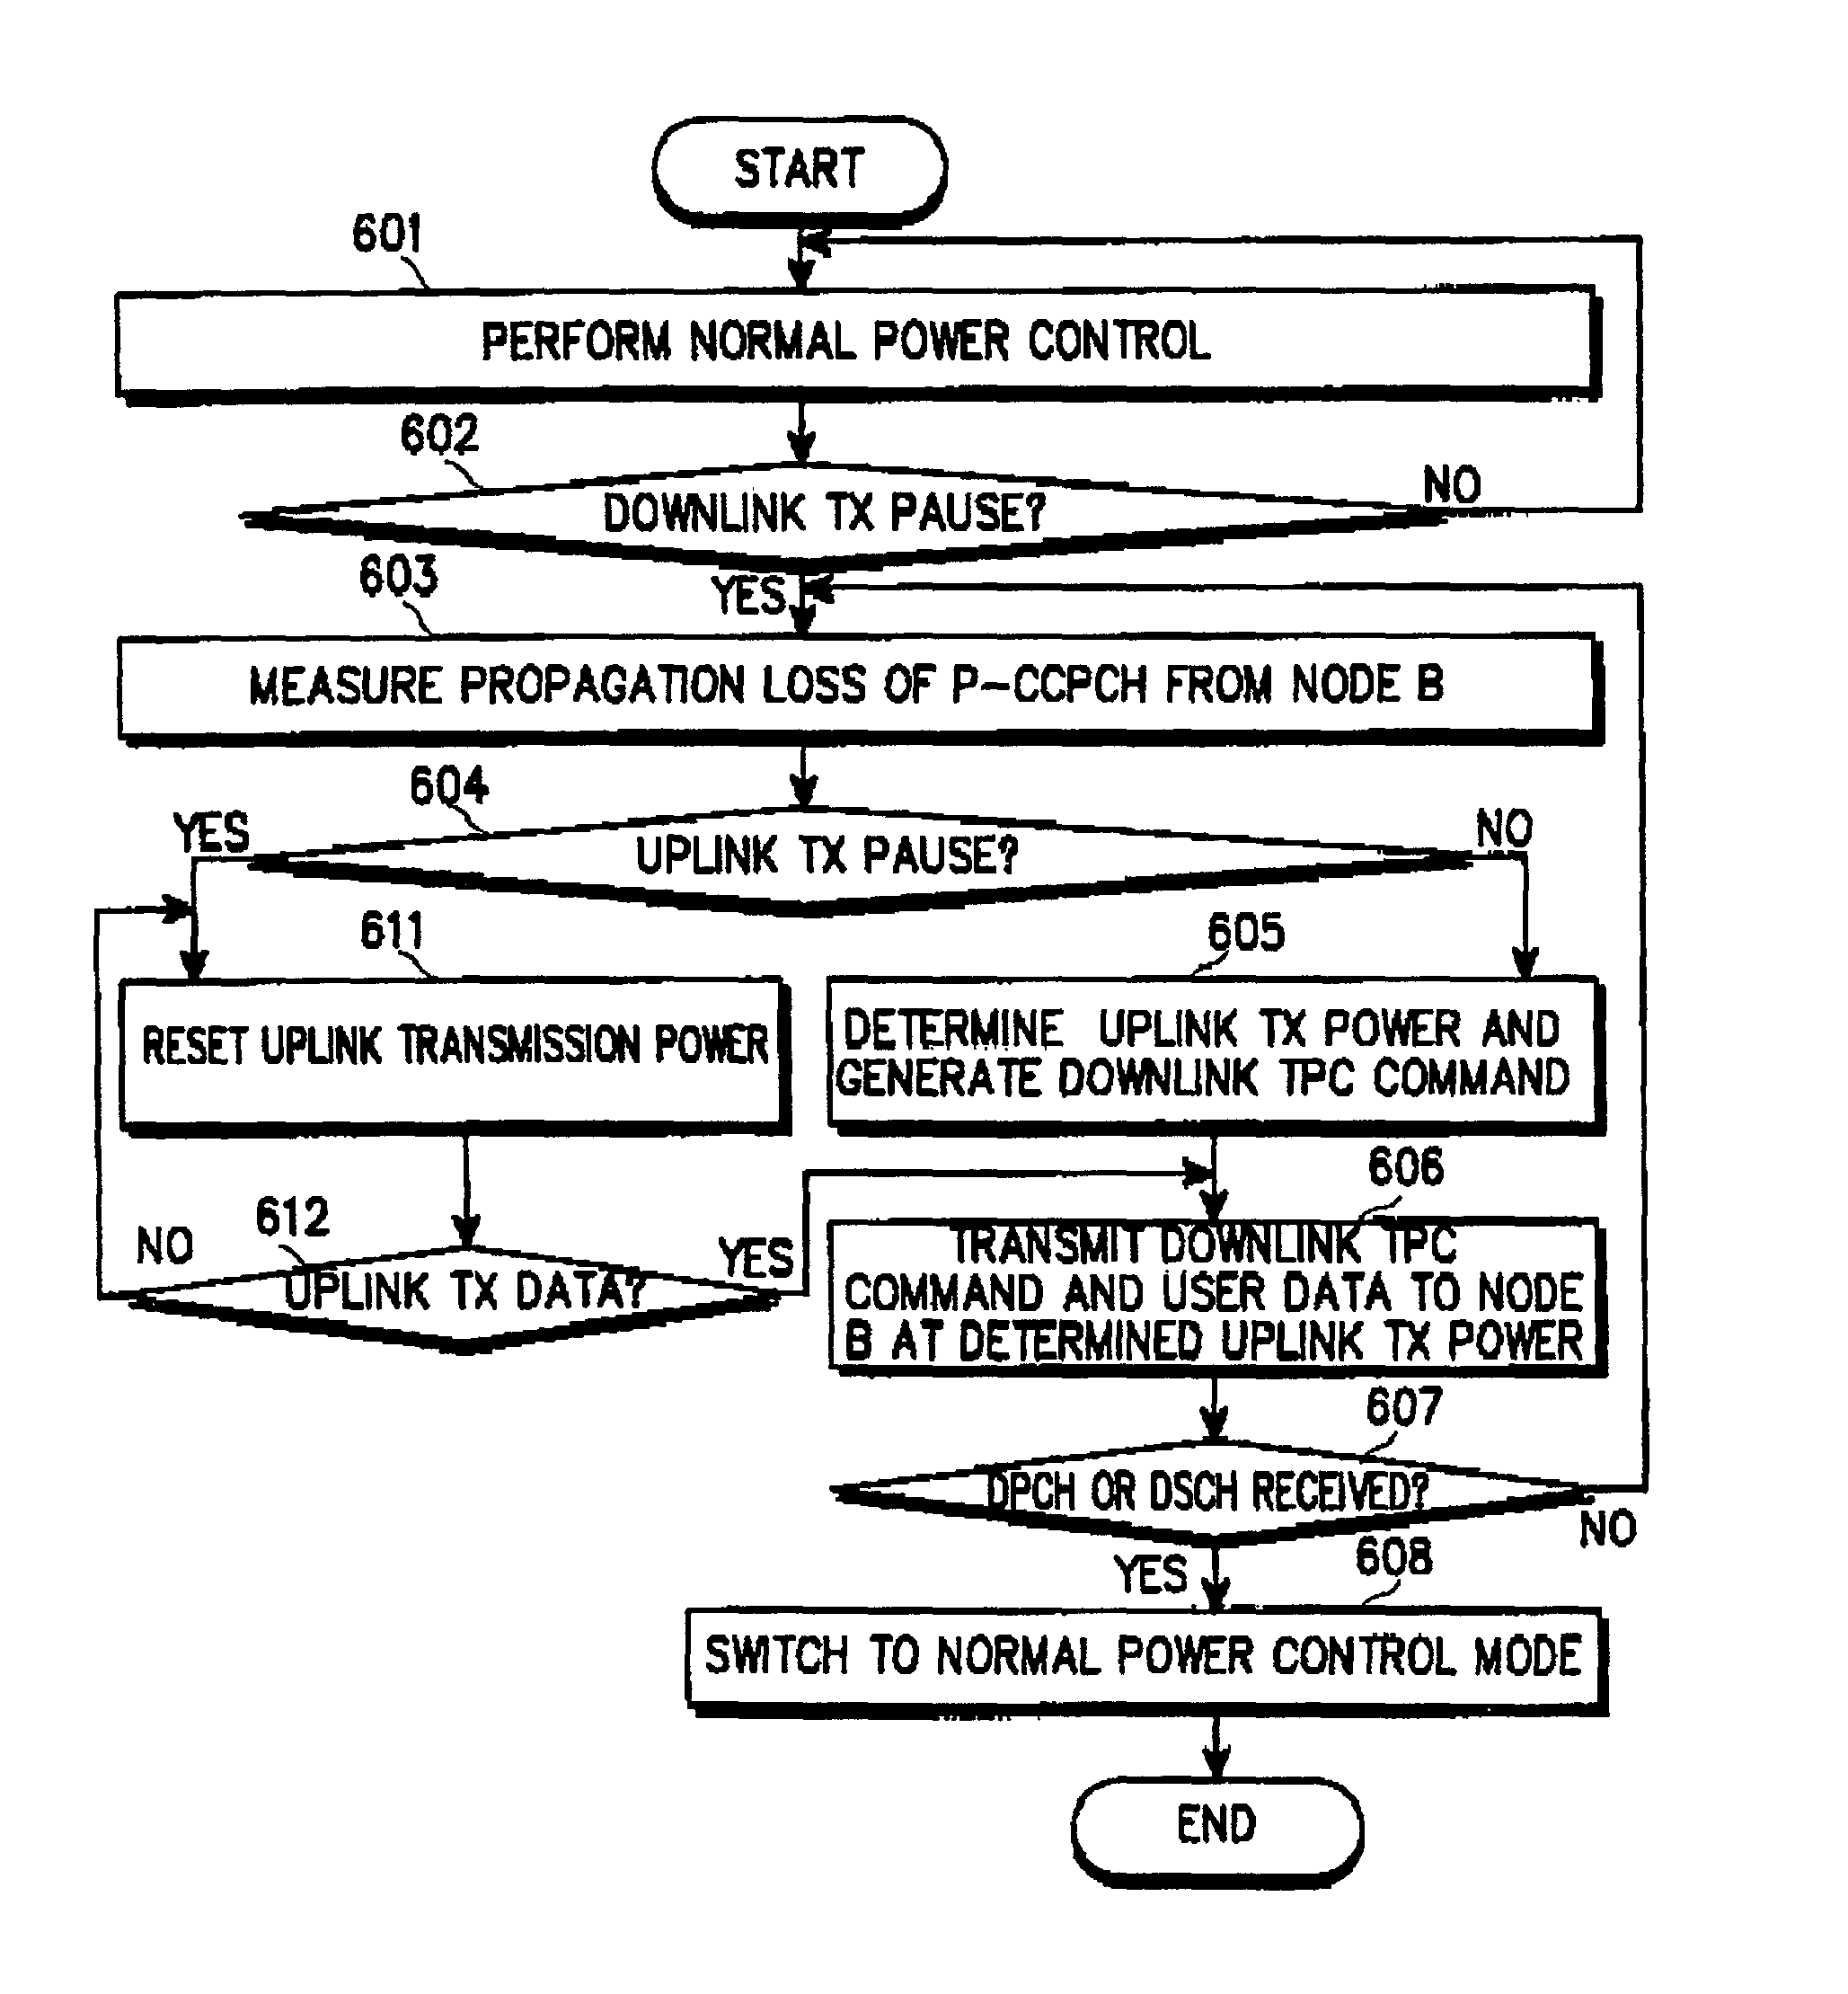 Apparatus and method for controlling transmission power in an NB-TDD CDMA communication system